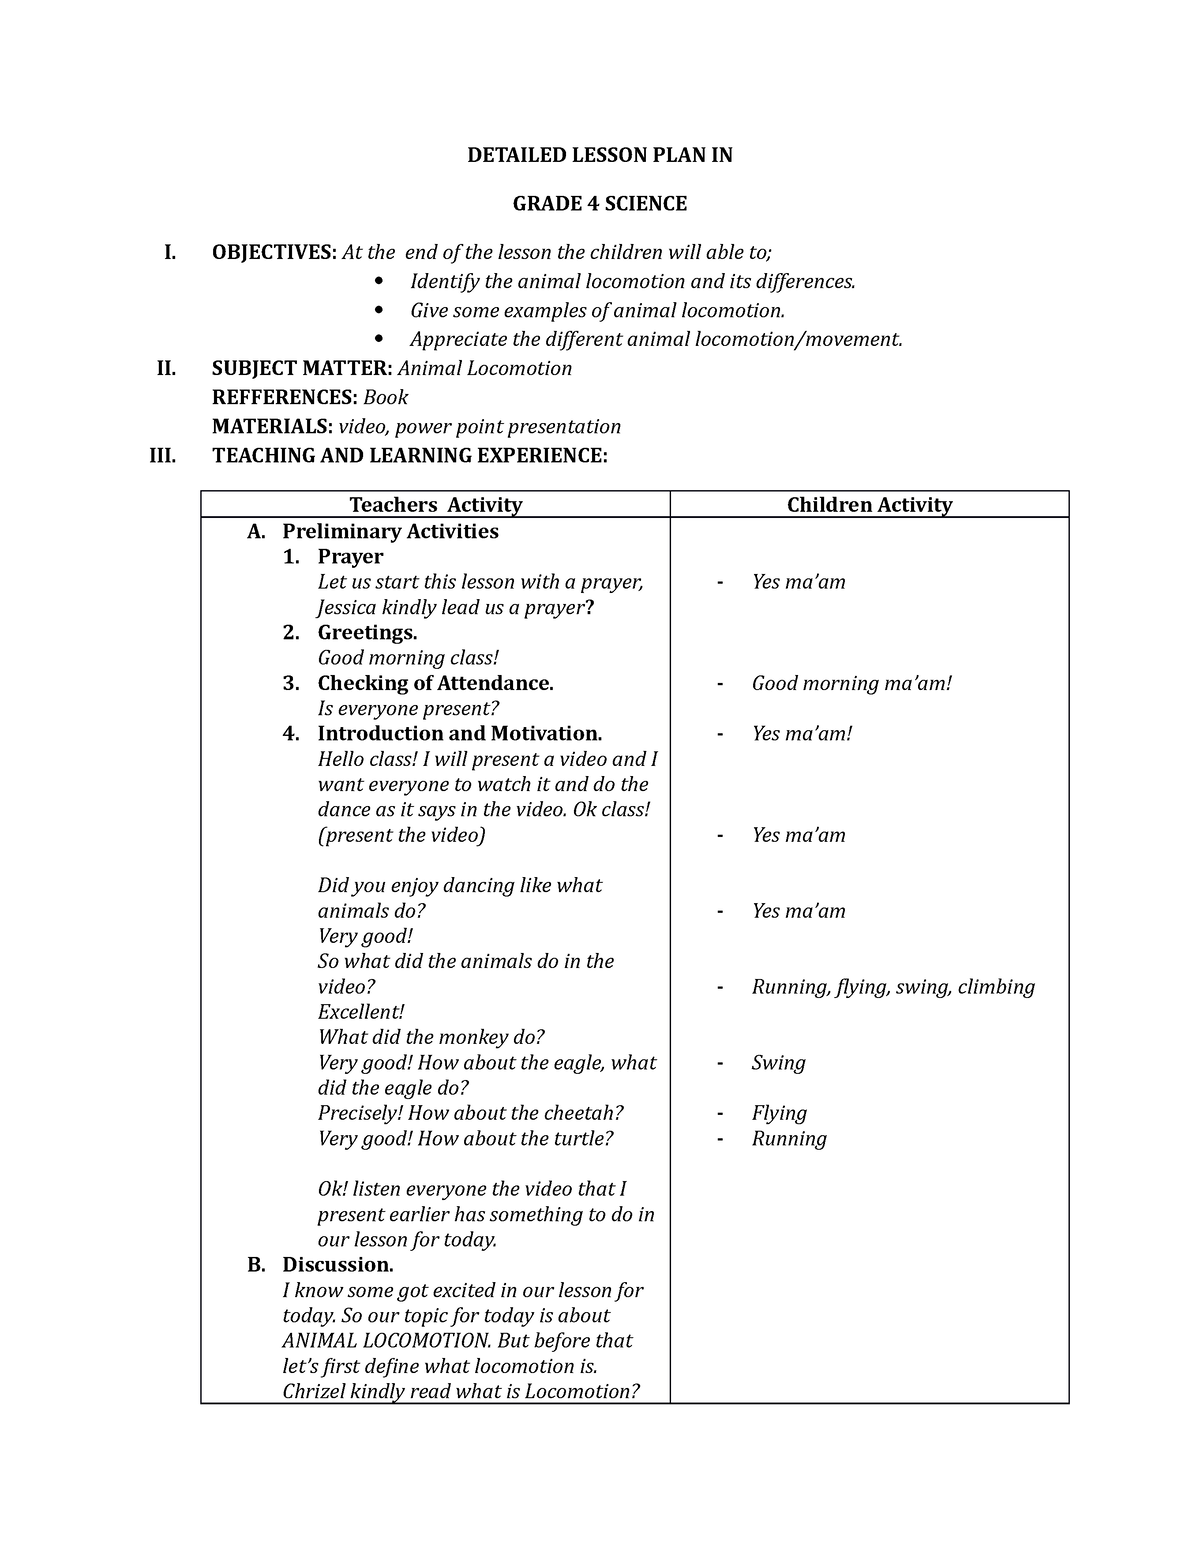 DETAILED LESSON PLAN IN FILIPINO - DETAILED LESSON PLAN IN GRADE 4